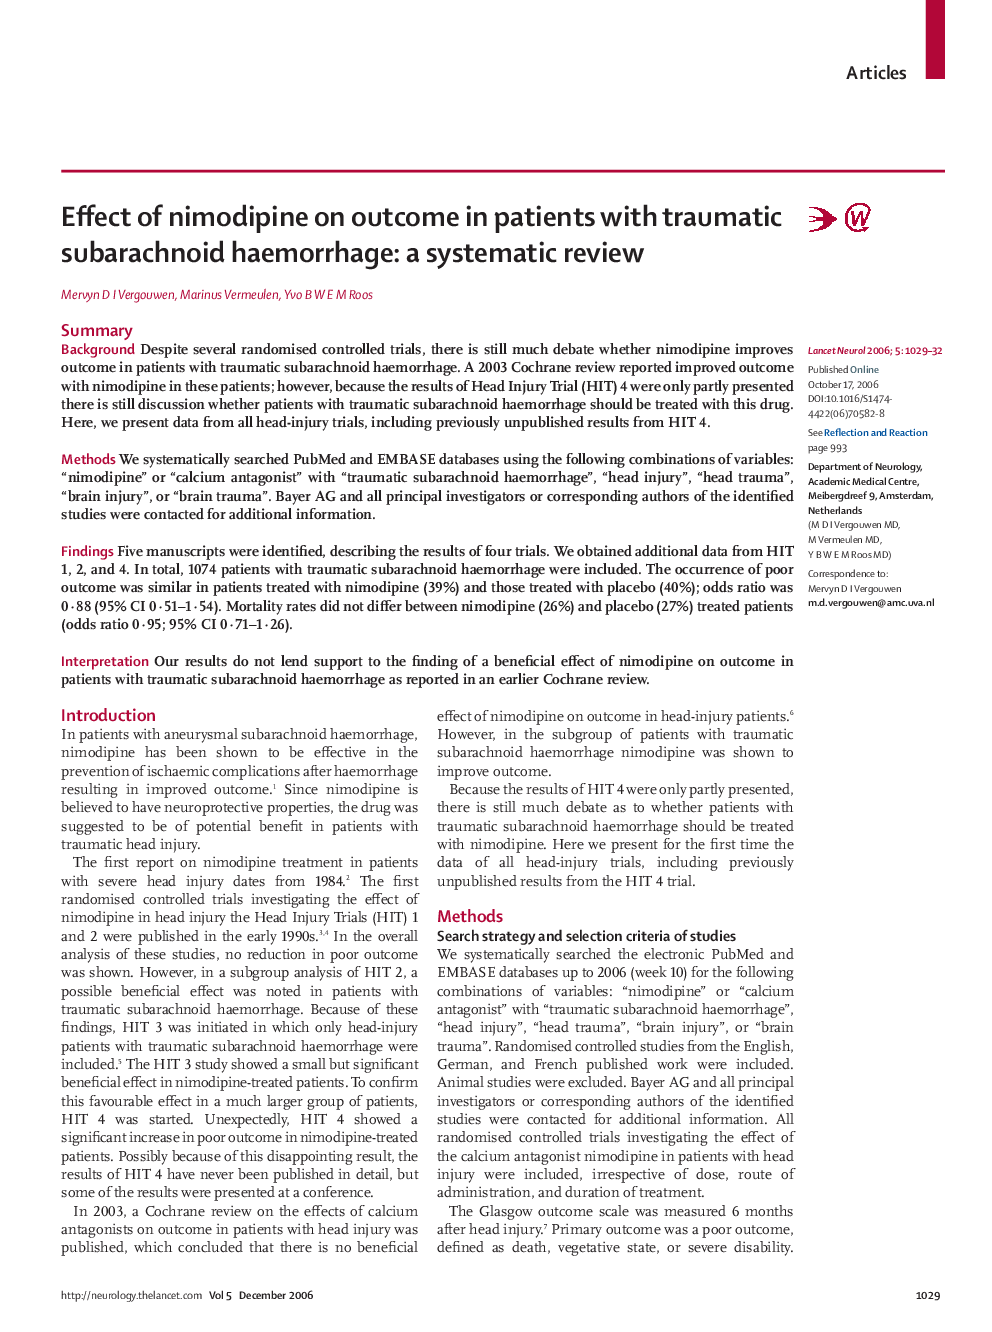 Effect of nimodipine on outcome in patients with traumatic subarachnoid haemorrhage: a systematic review